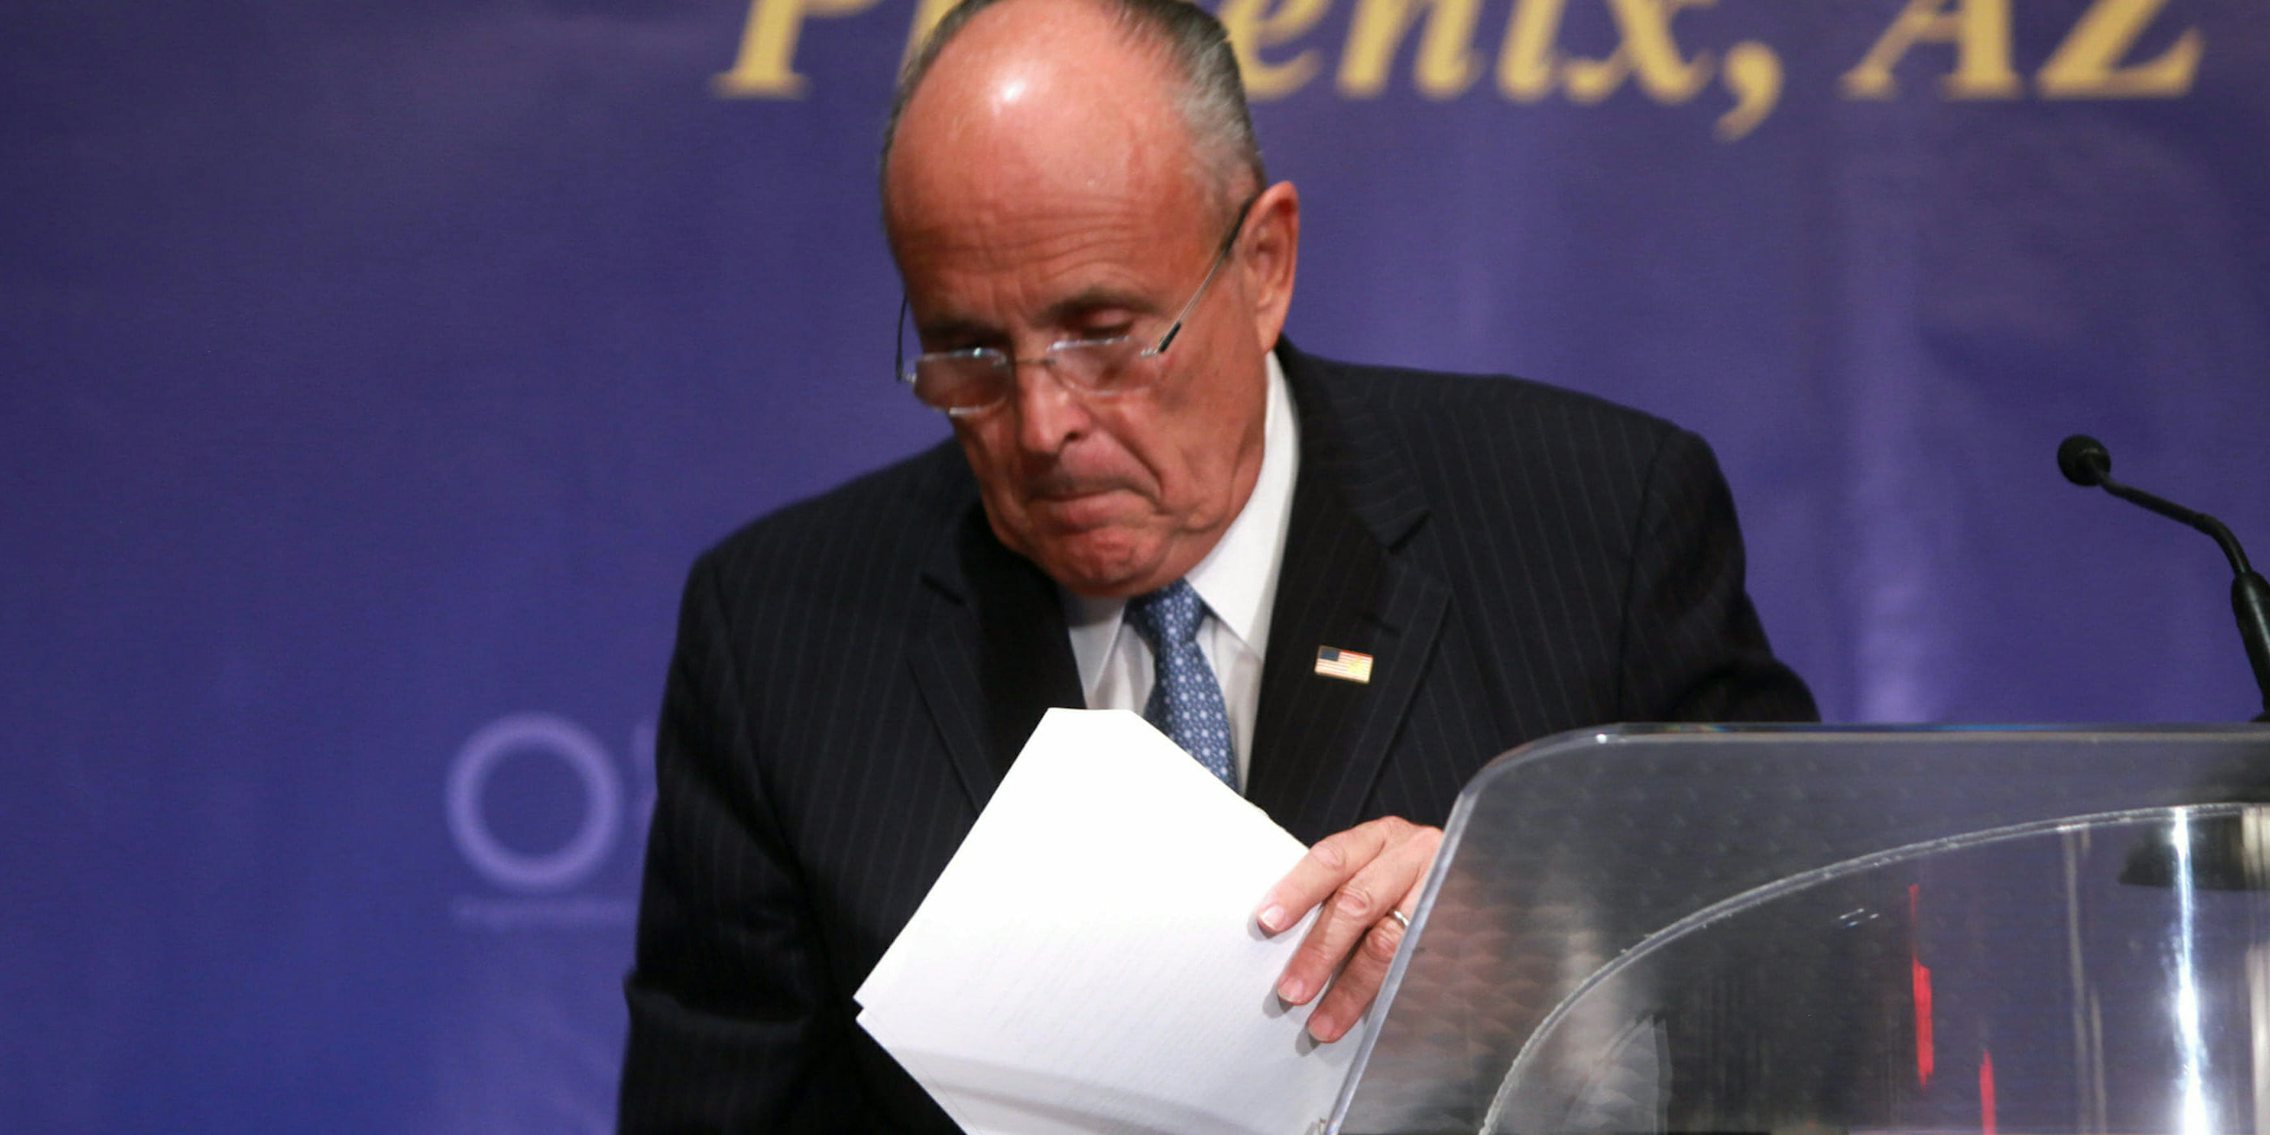 Rudy Giuliani believes women shouldn't support the porn industry. He's a moron.